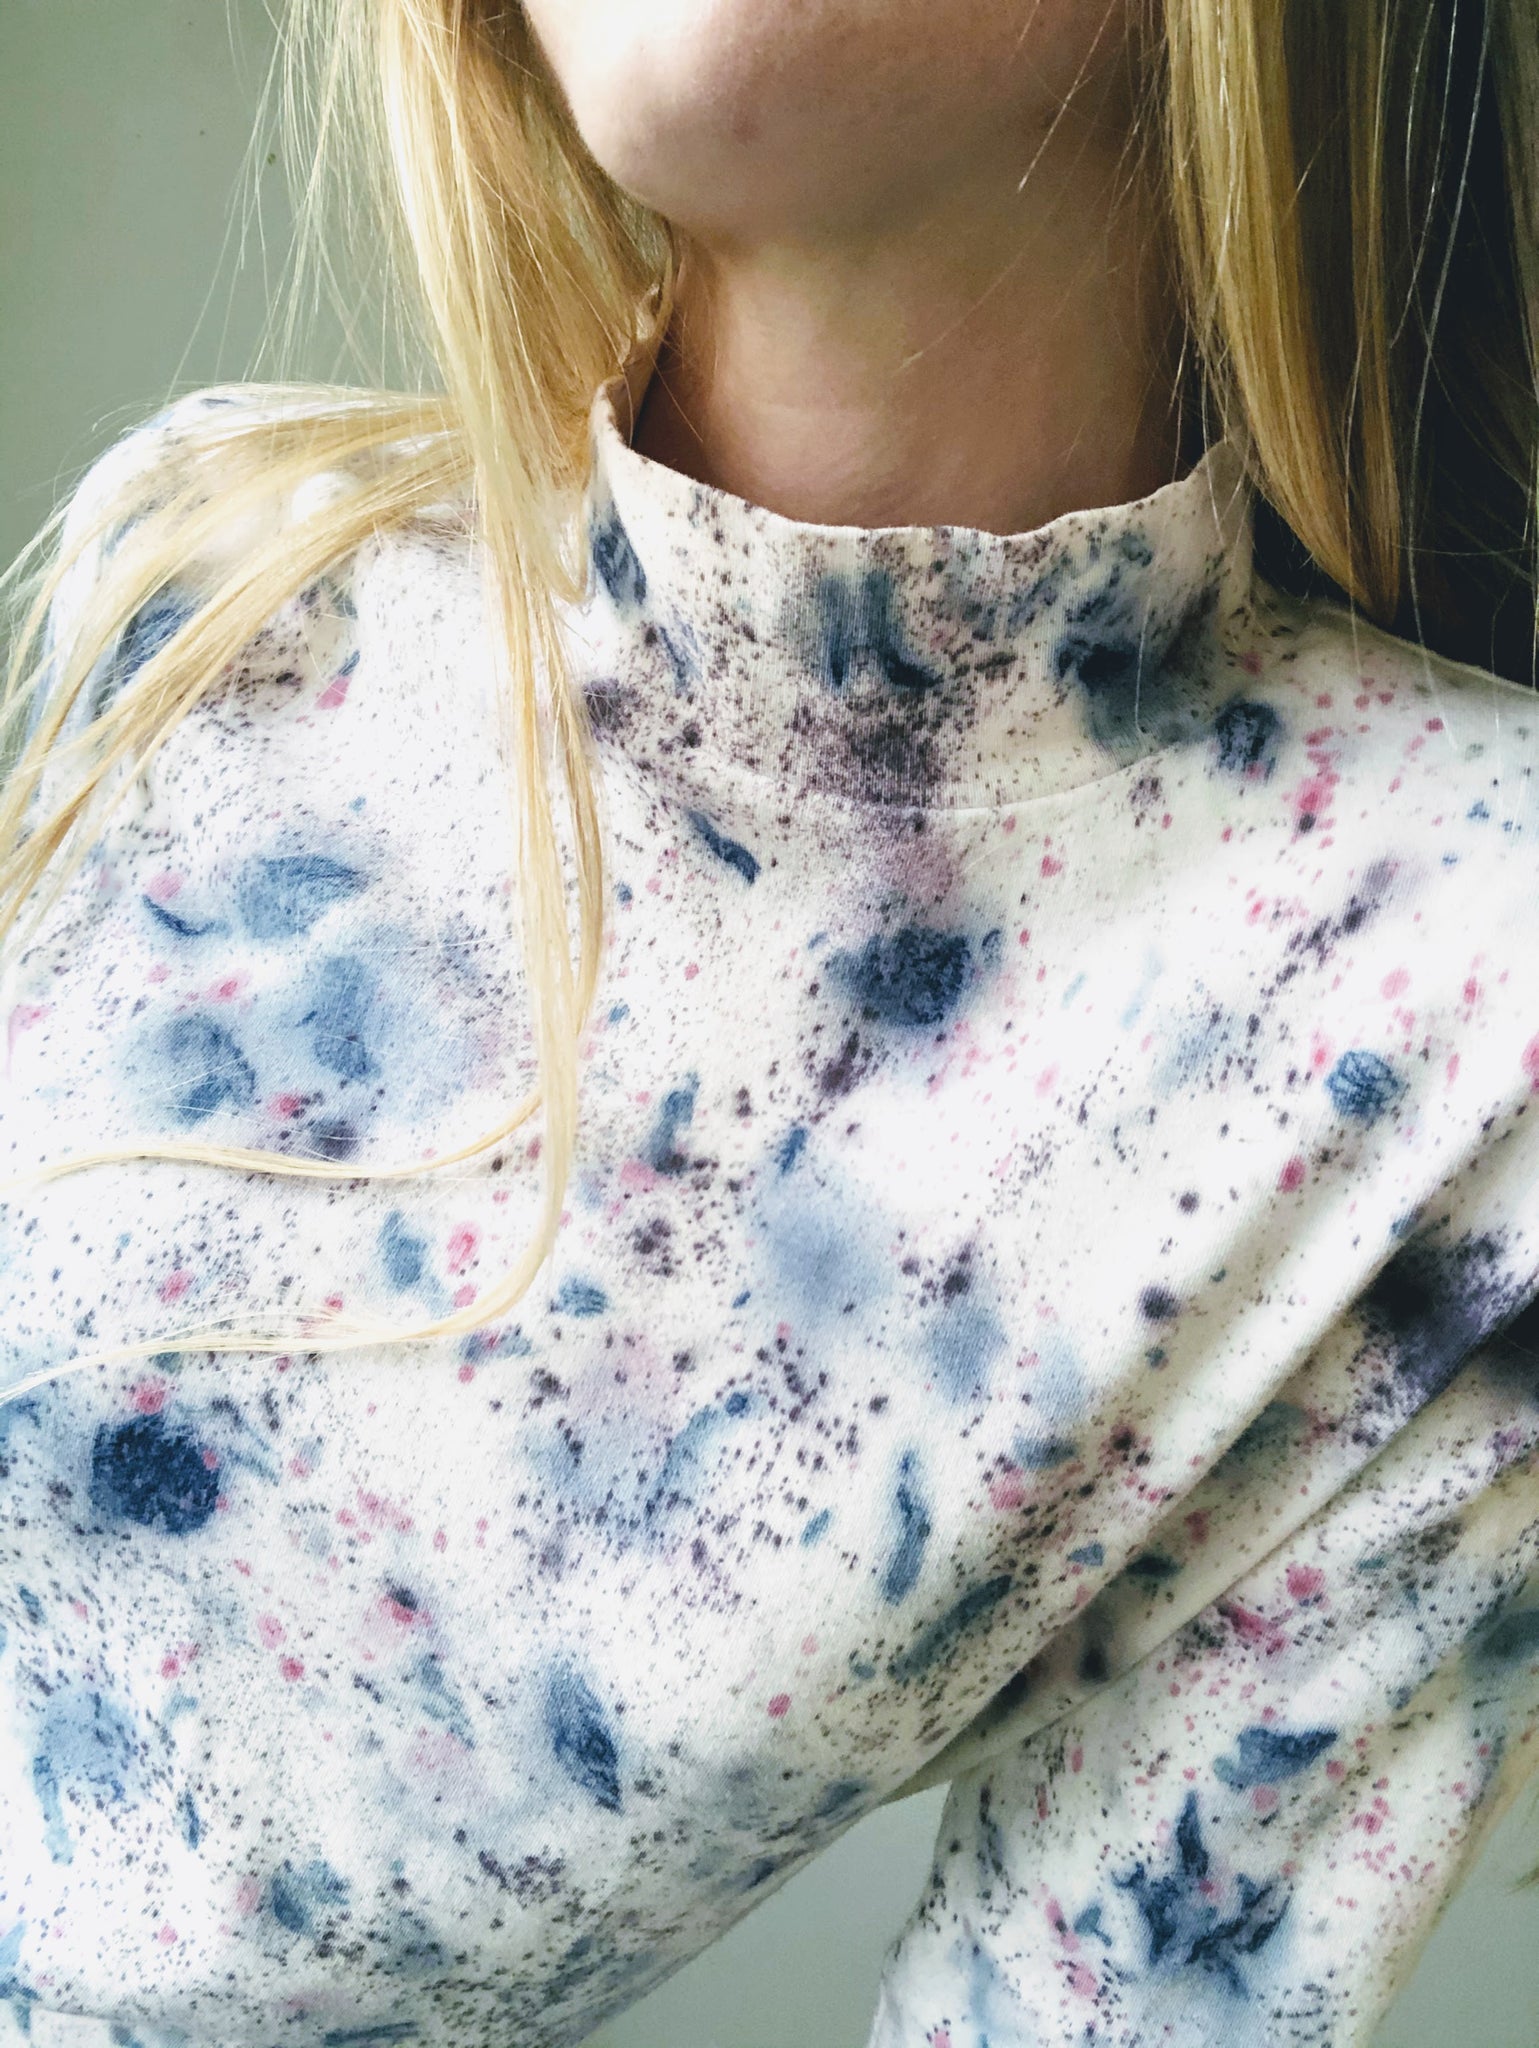 Want to Customize Your Clothes With Natural Dyes? Let an Expert Tell You How